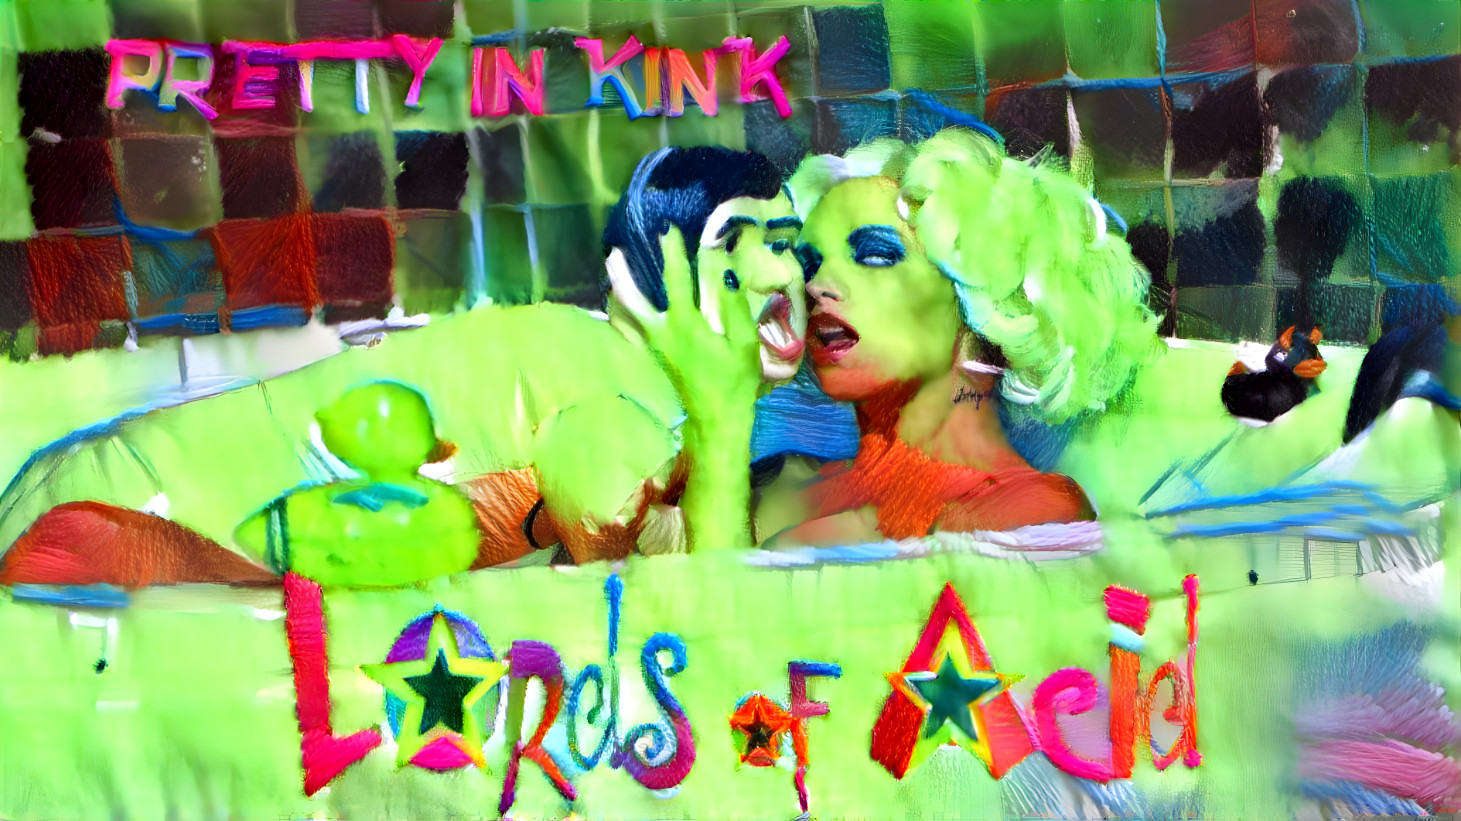 lords of acid Pretty in Kink album cover retexture